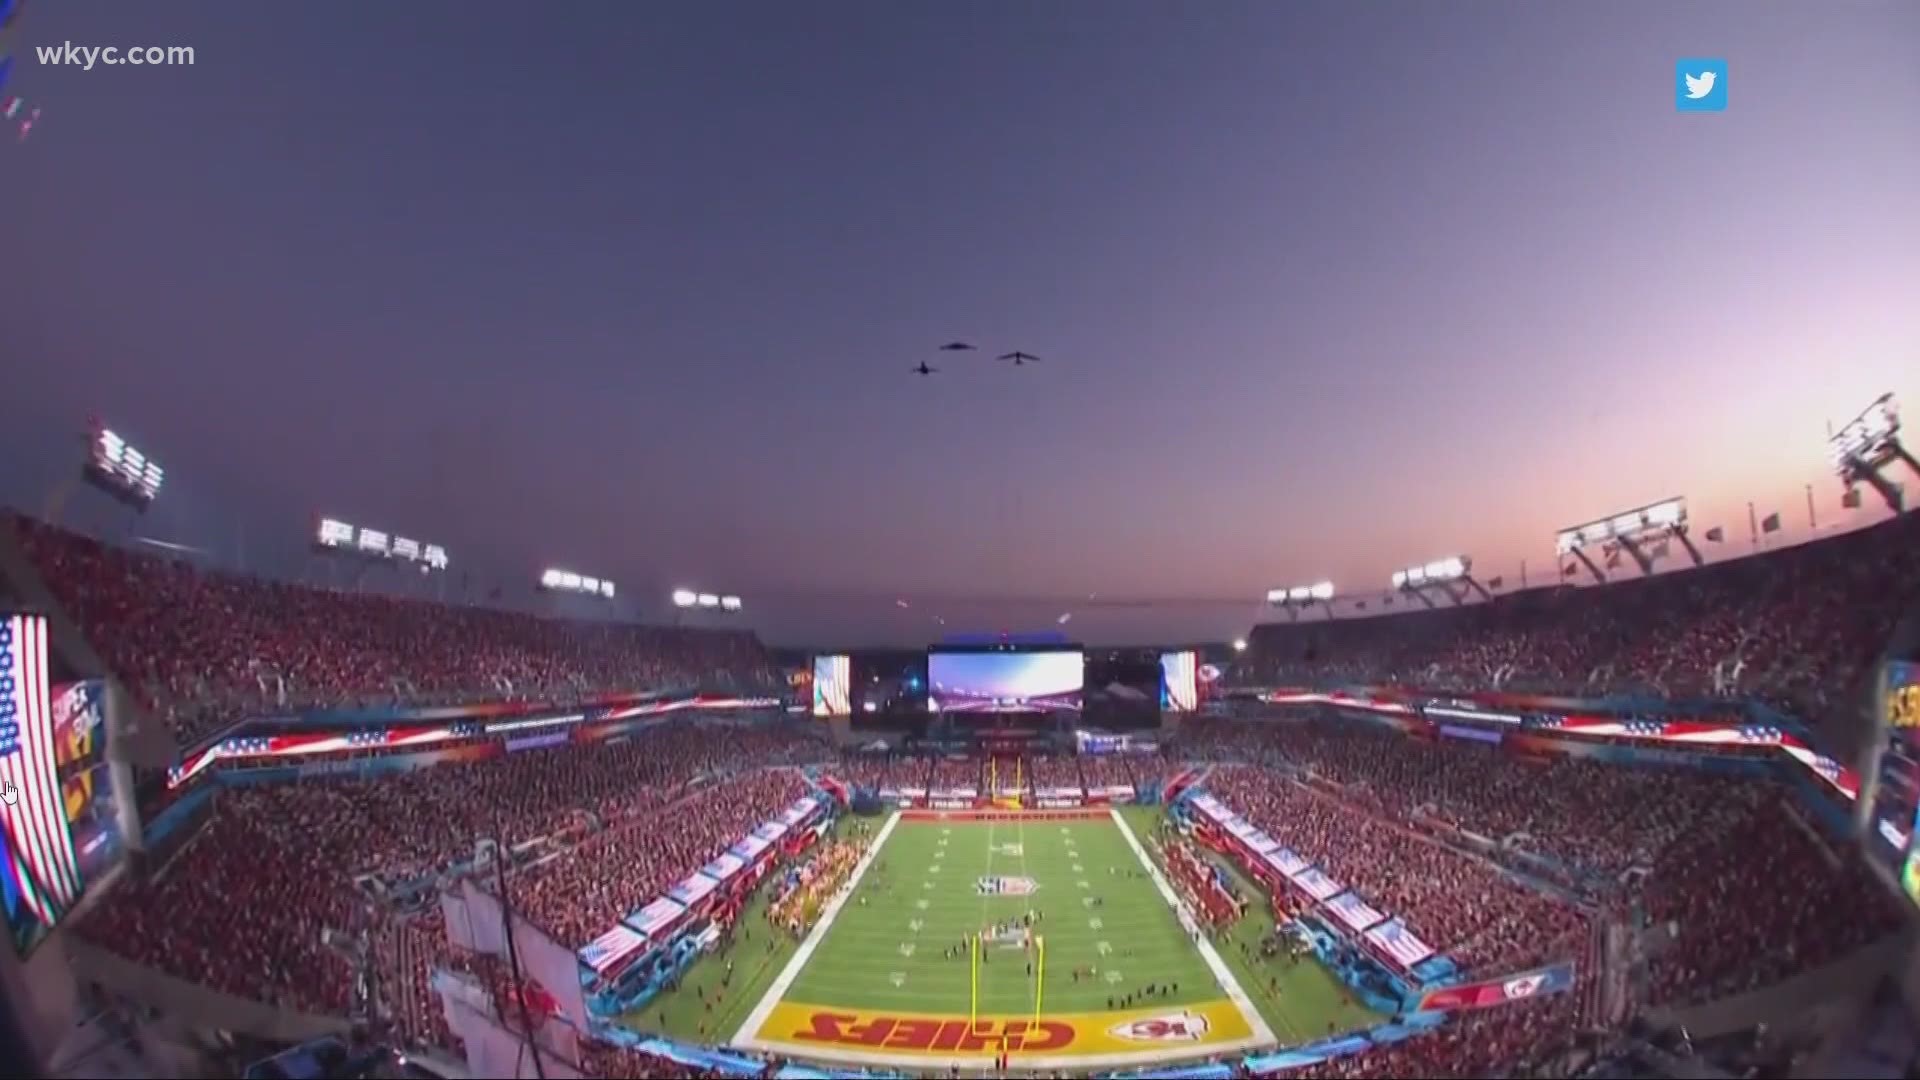 Ohio was represented in the Super Bowl yesterday.  Captain Sara Kociuba led the flyover before the game.  She's from Cleveland and went to the University of Dayton.